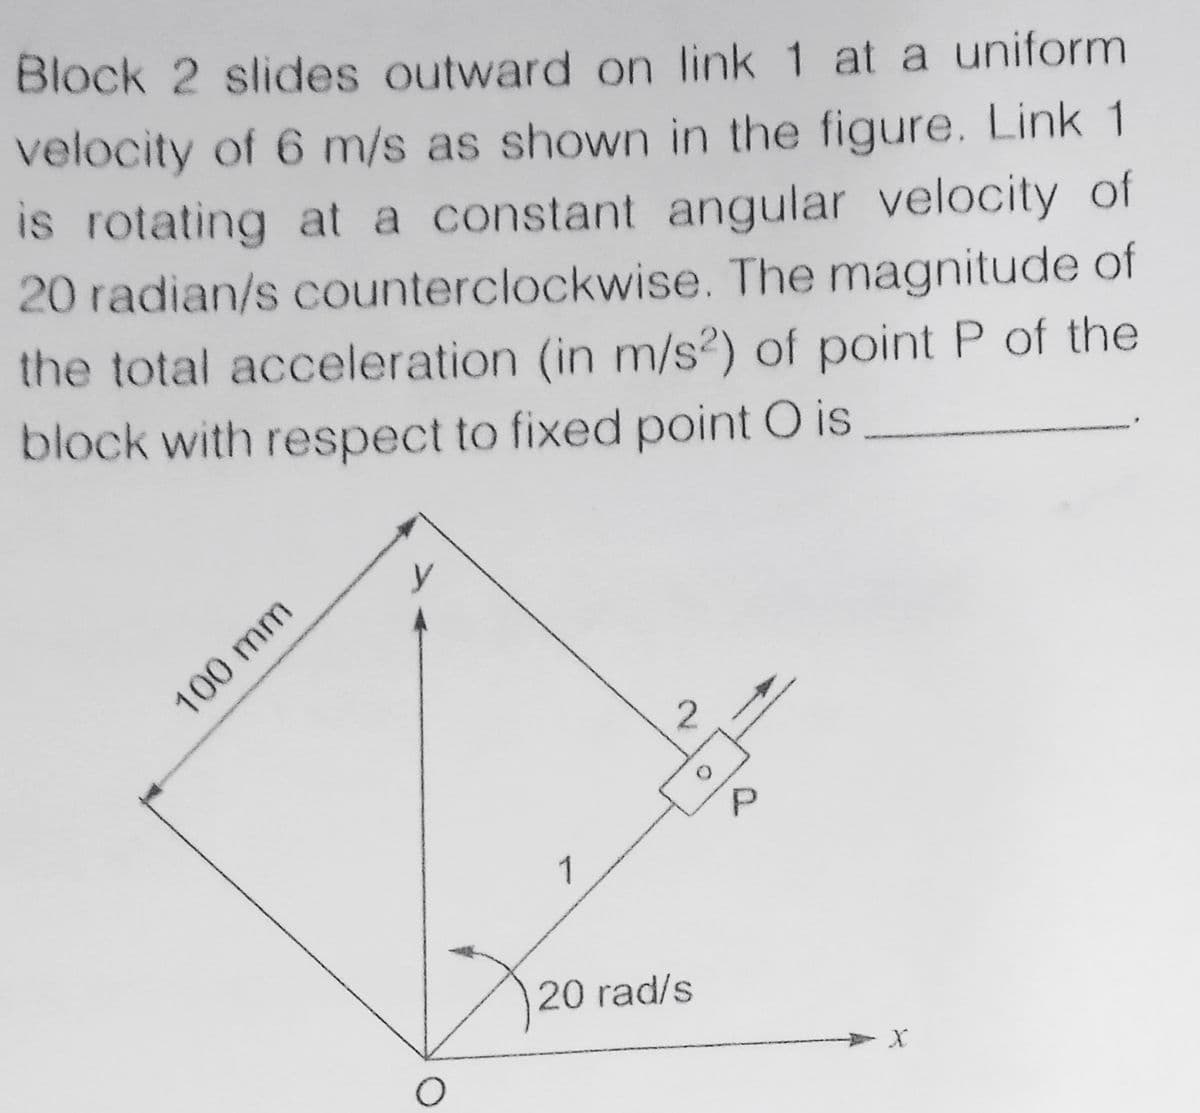 Block 2 slides outward on link 1 at a uniform
velocity of 6 m/s as shown in the figure. Link 1
is rotating at a constant angular velocity of
20 radian/s counterclockwise. The magnitude of
the total acceleration (in m/s?) of point P of the
block with respect to fixed point O is
100 mm
1
20 rad/s
P.
